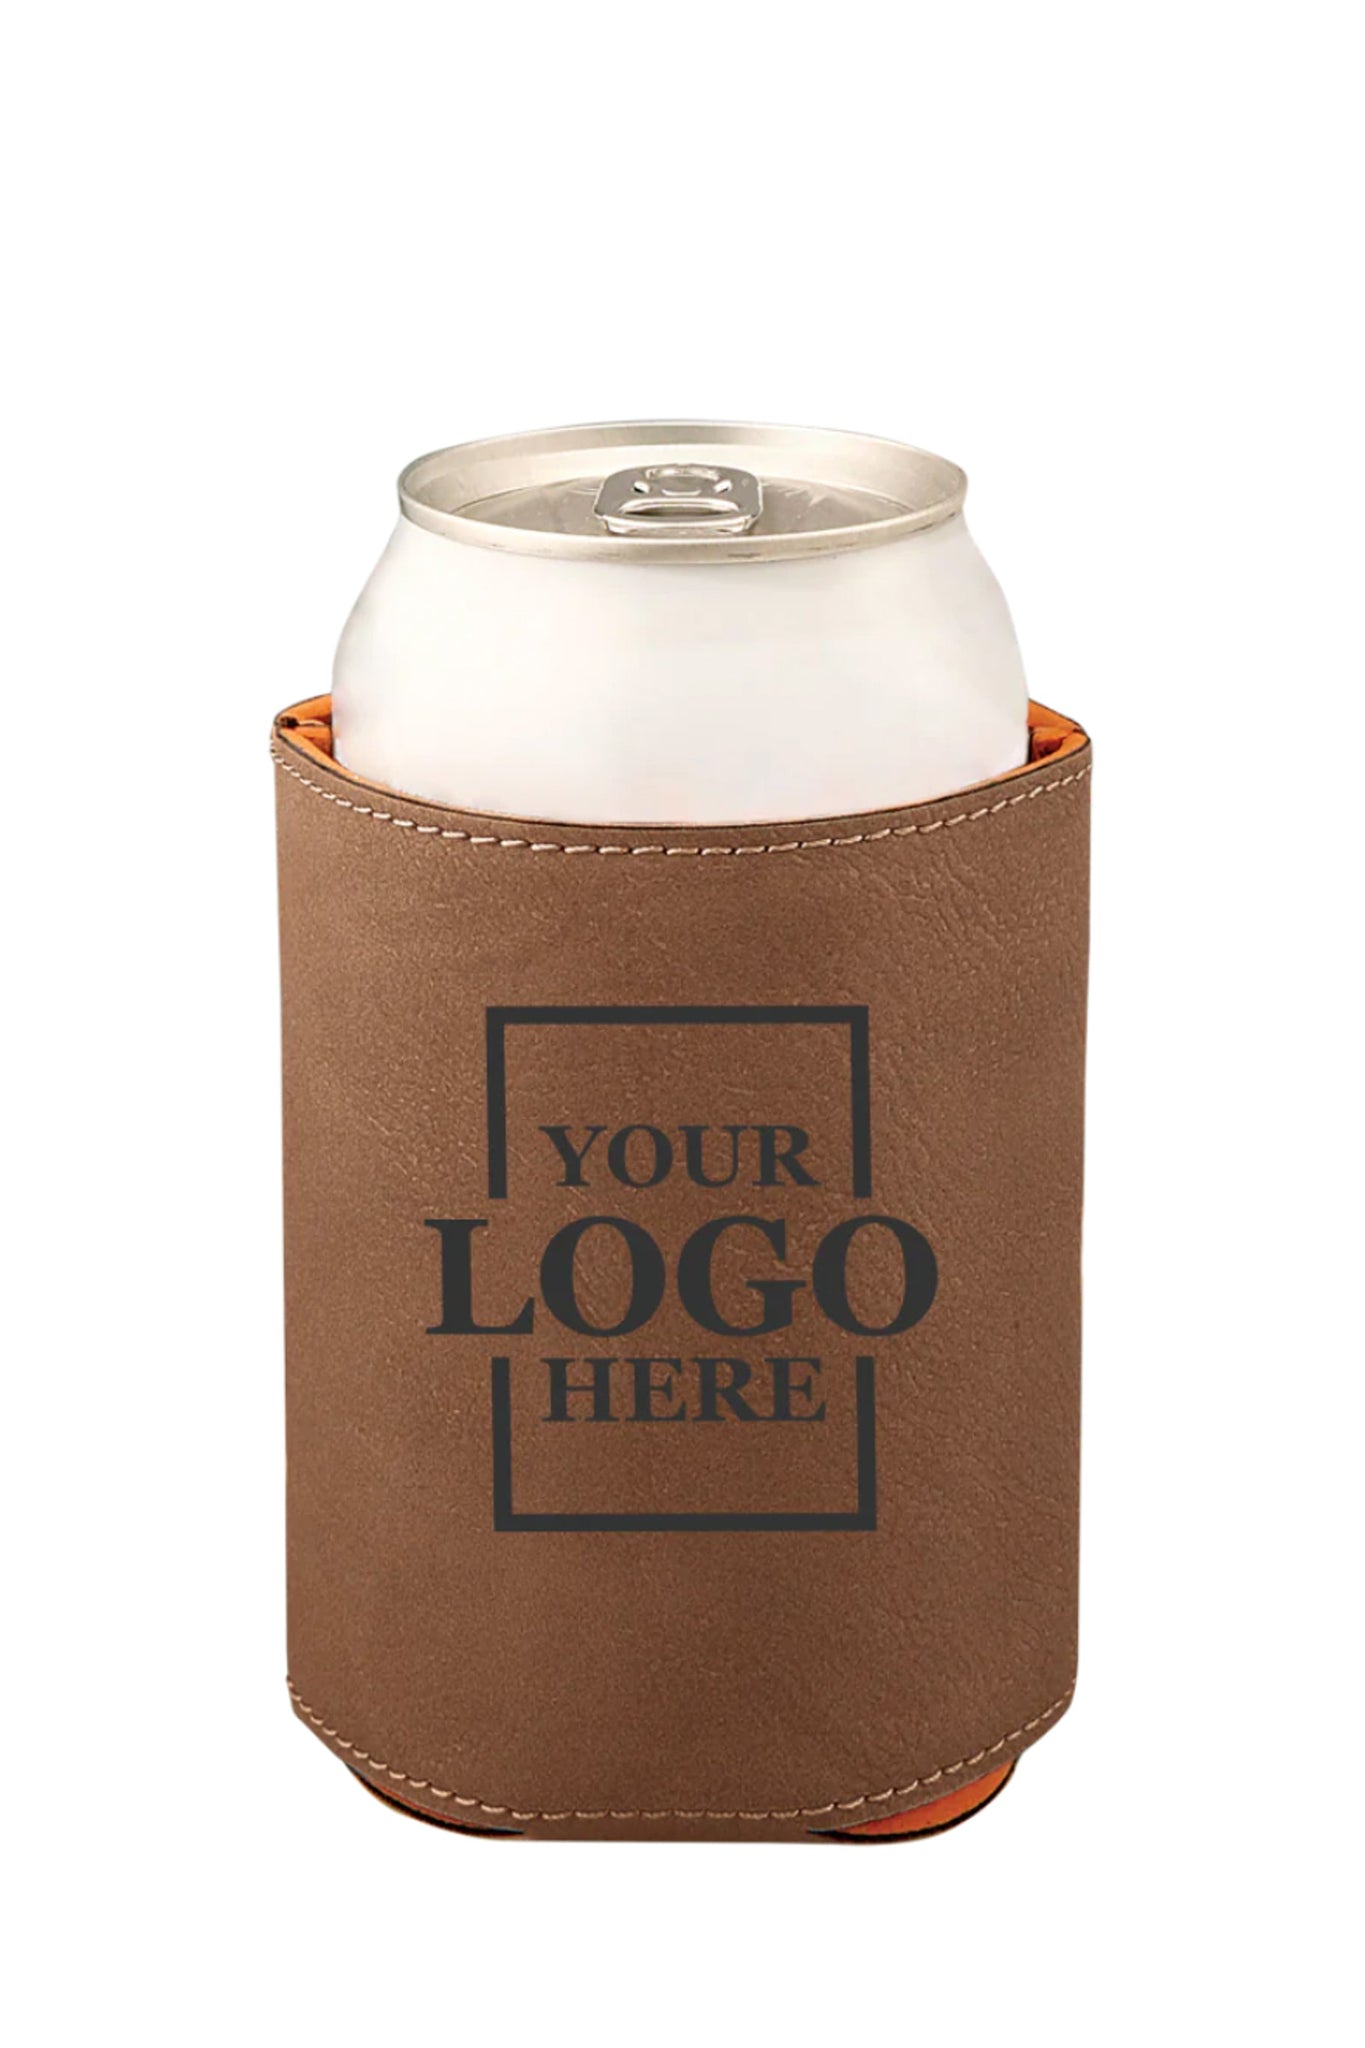 Beer-not Beer Leather Can Koozie Can Cooler -  Israel